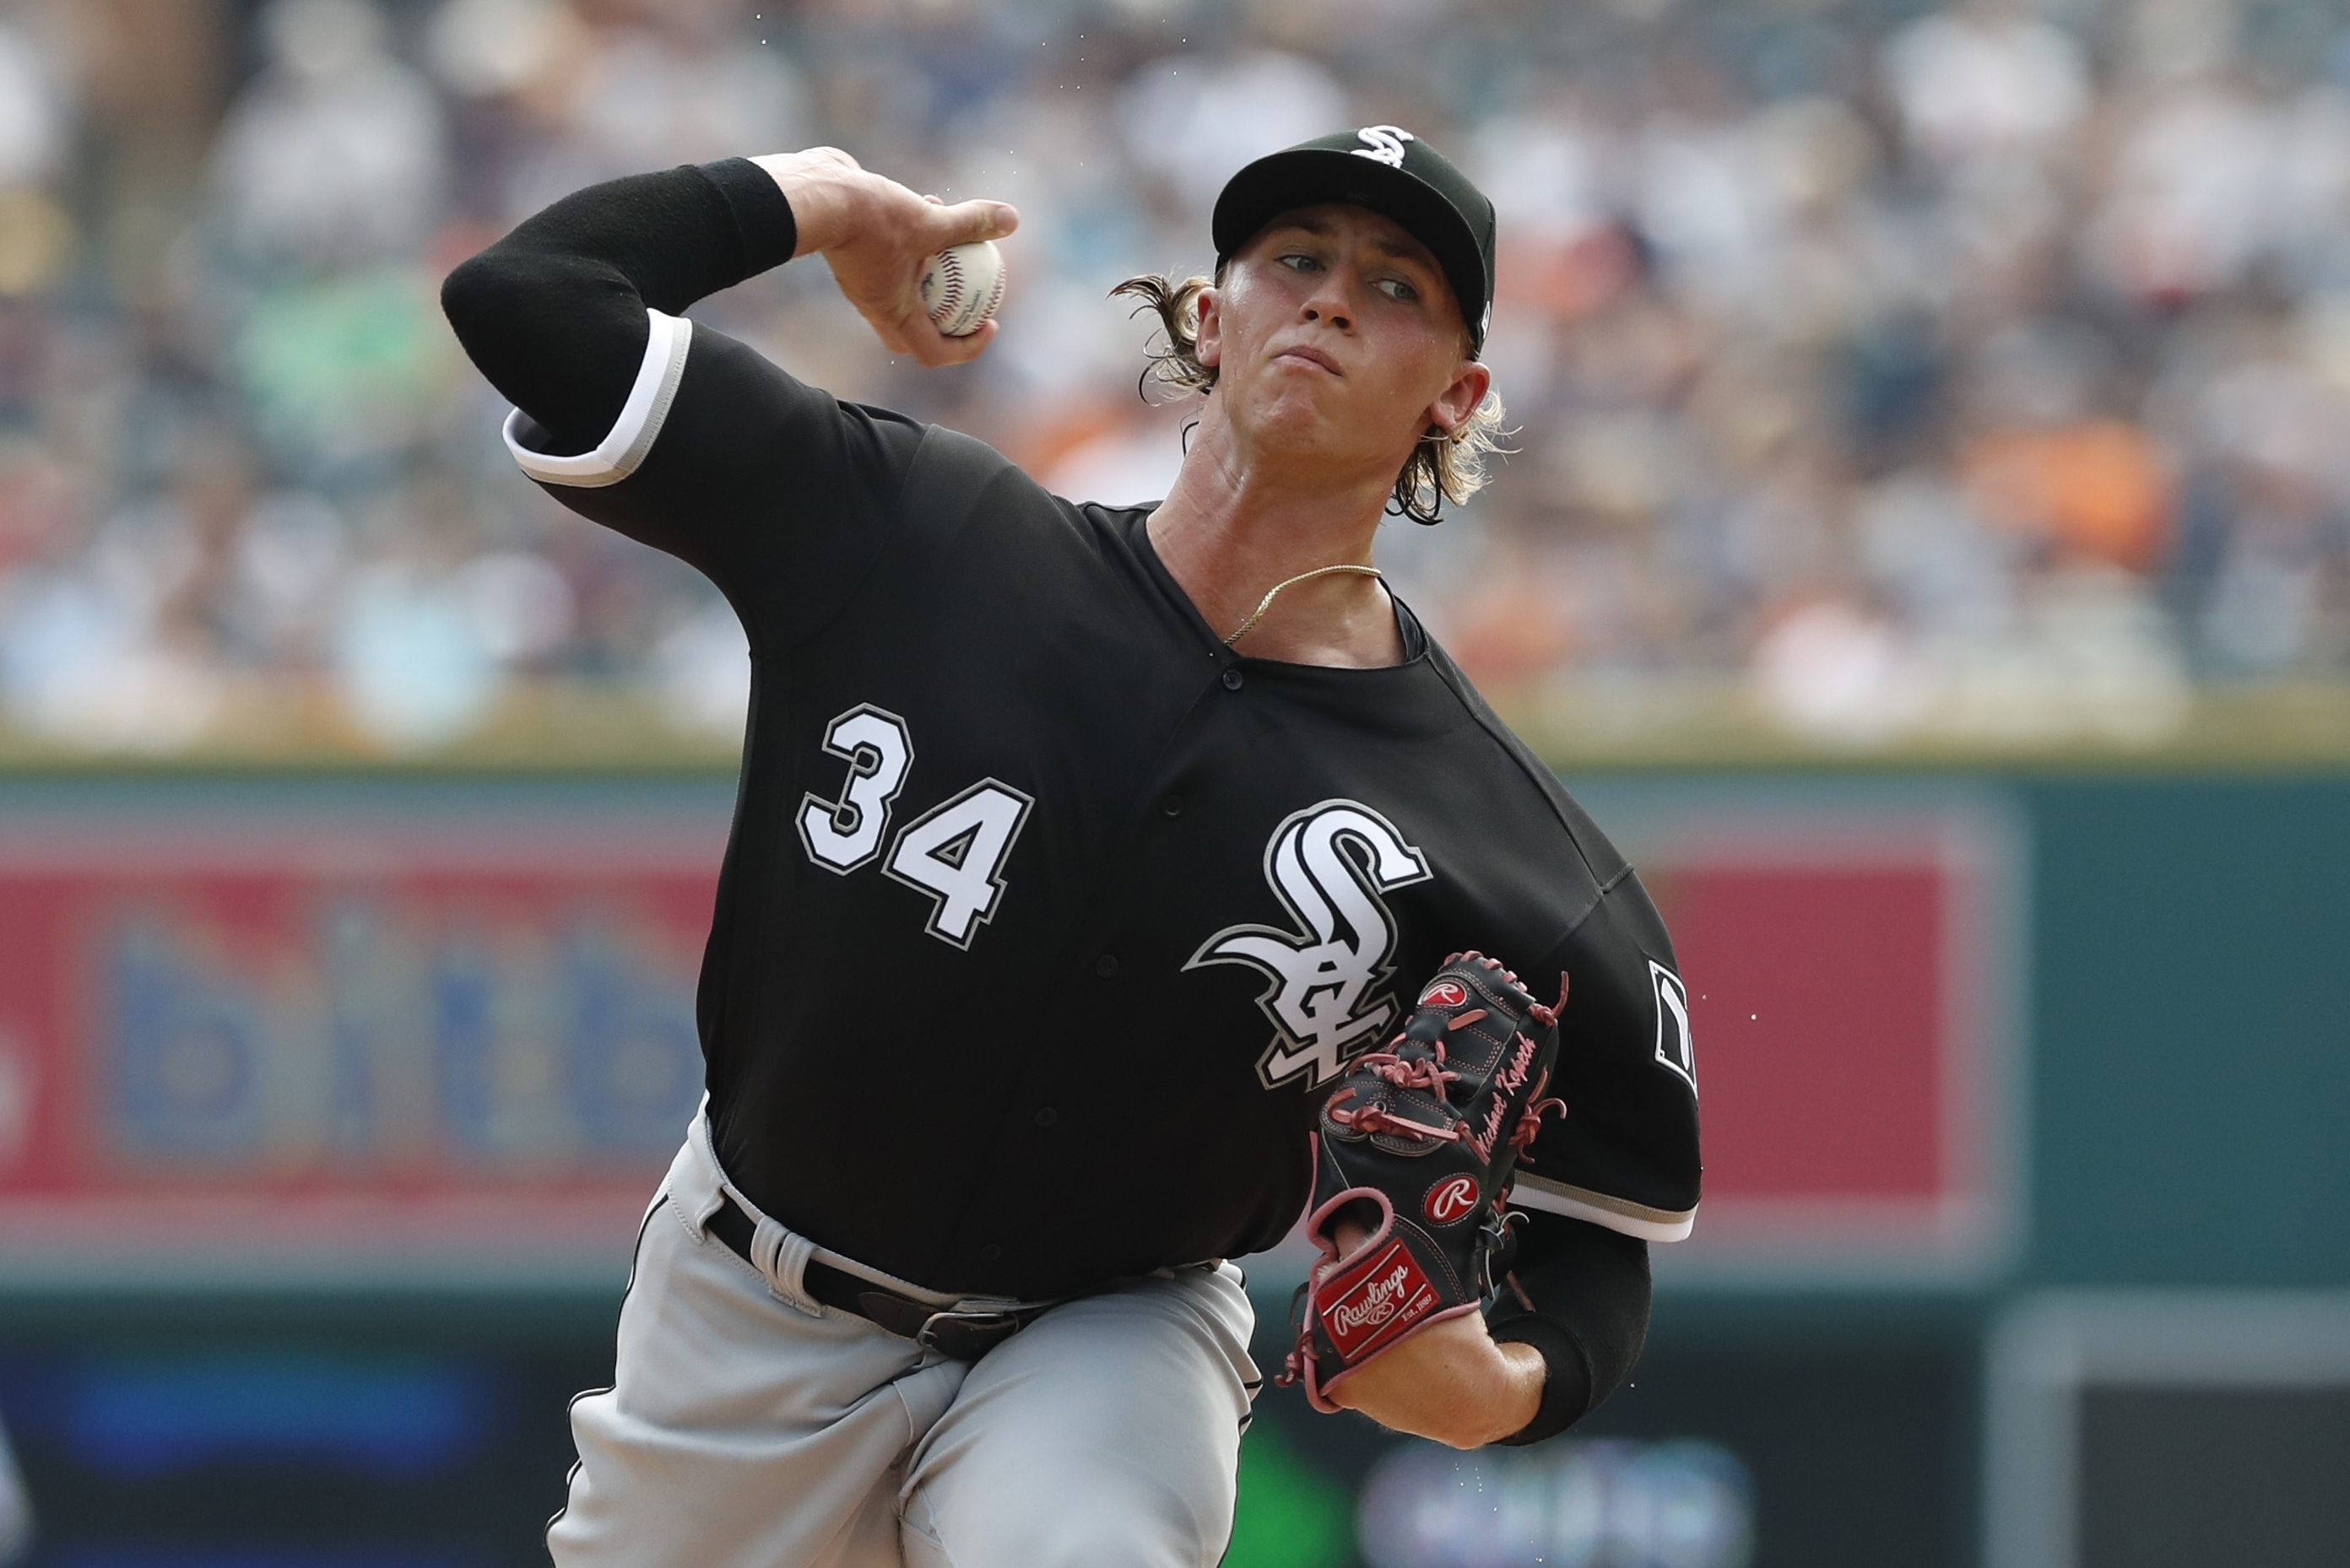 White Sox's Michael Kopech and Vanessa Morgan Call it Quits in 2023